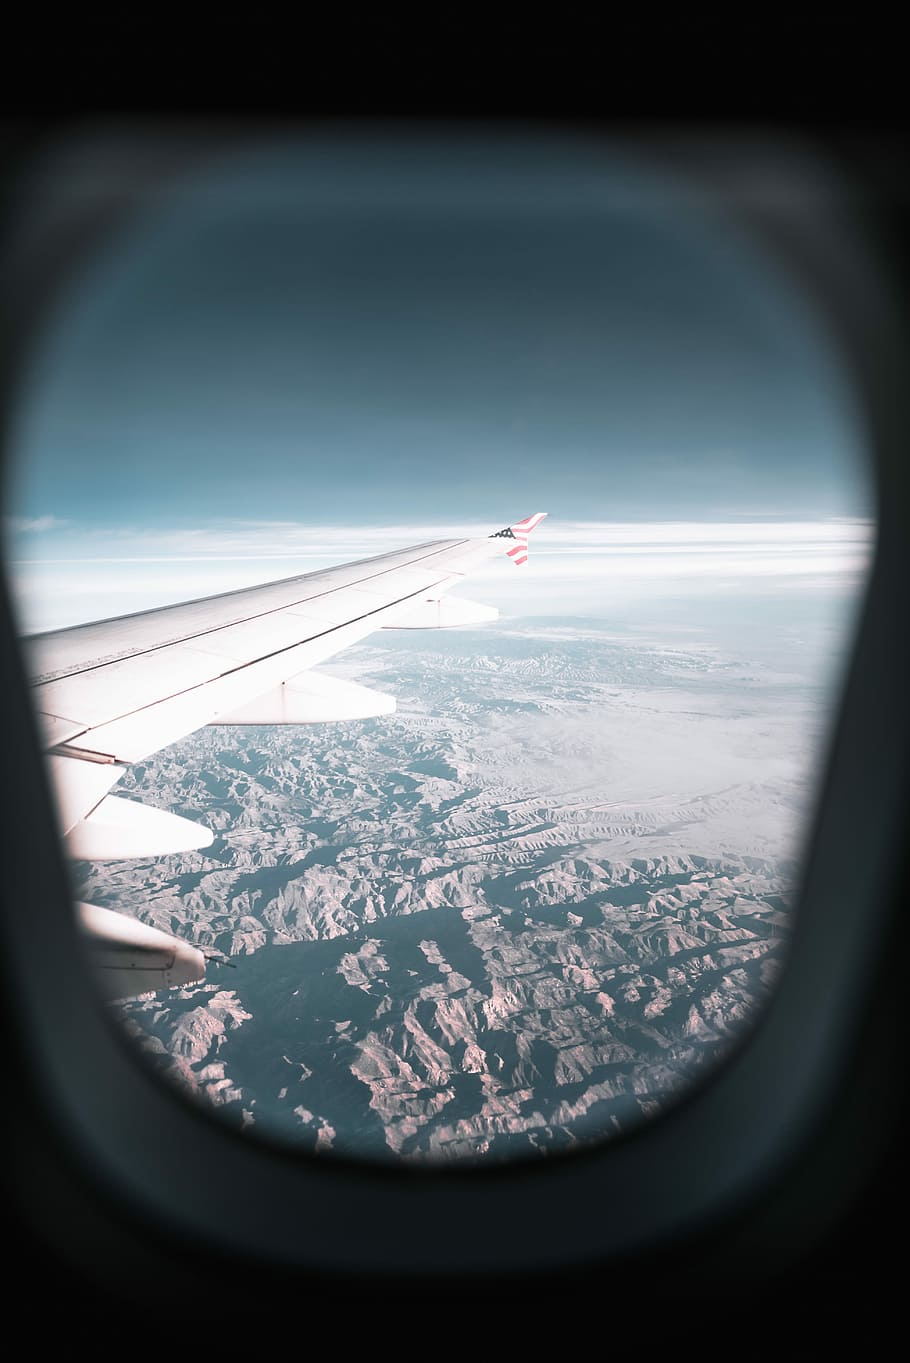 HD wallpaper: airplane window view of airplane's wing and mountains during  day, plane-window photography of mountain and cloud | Wallpaper Flare